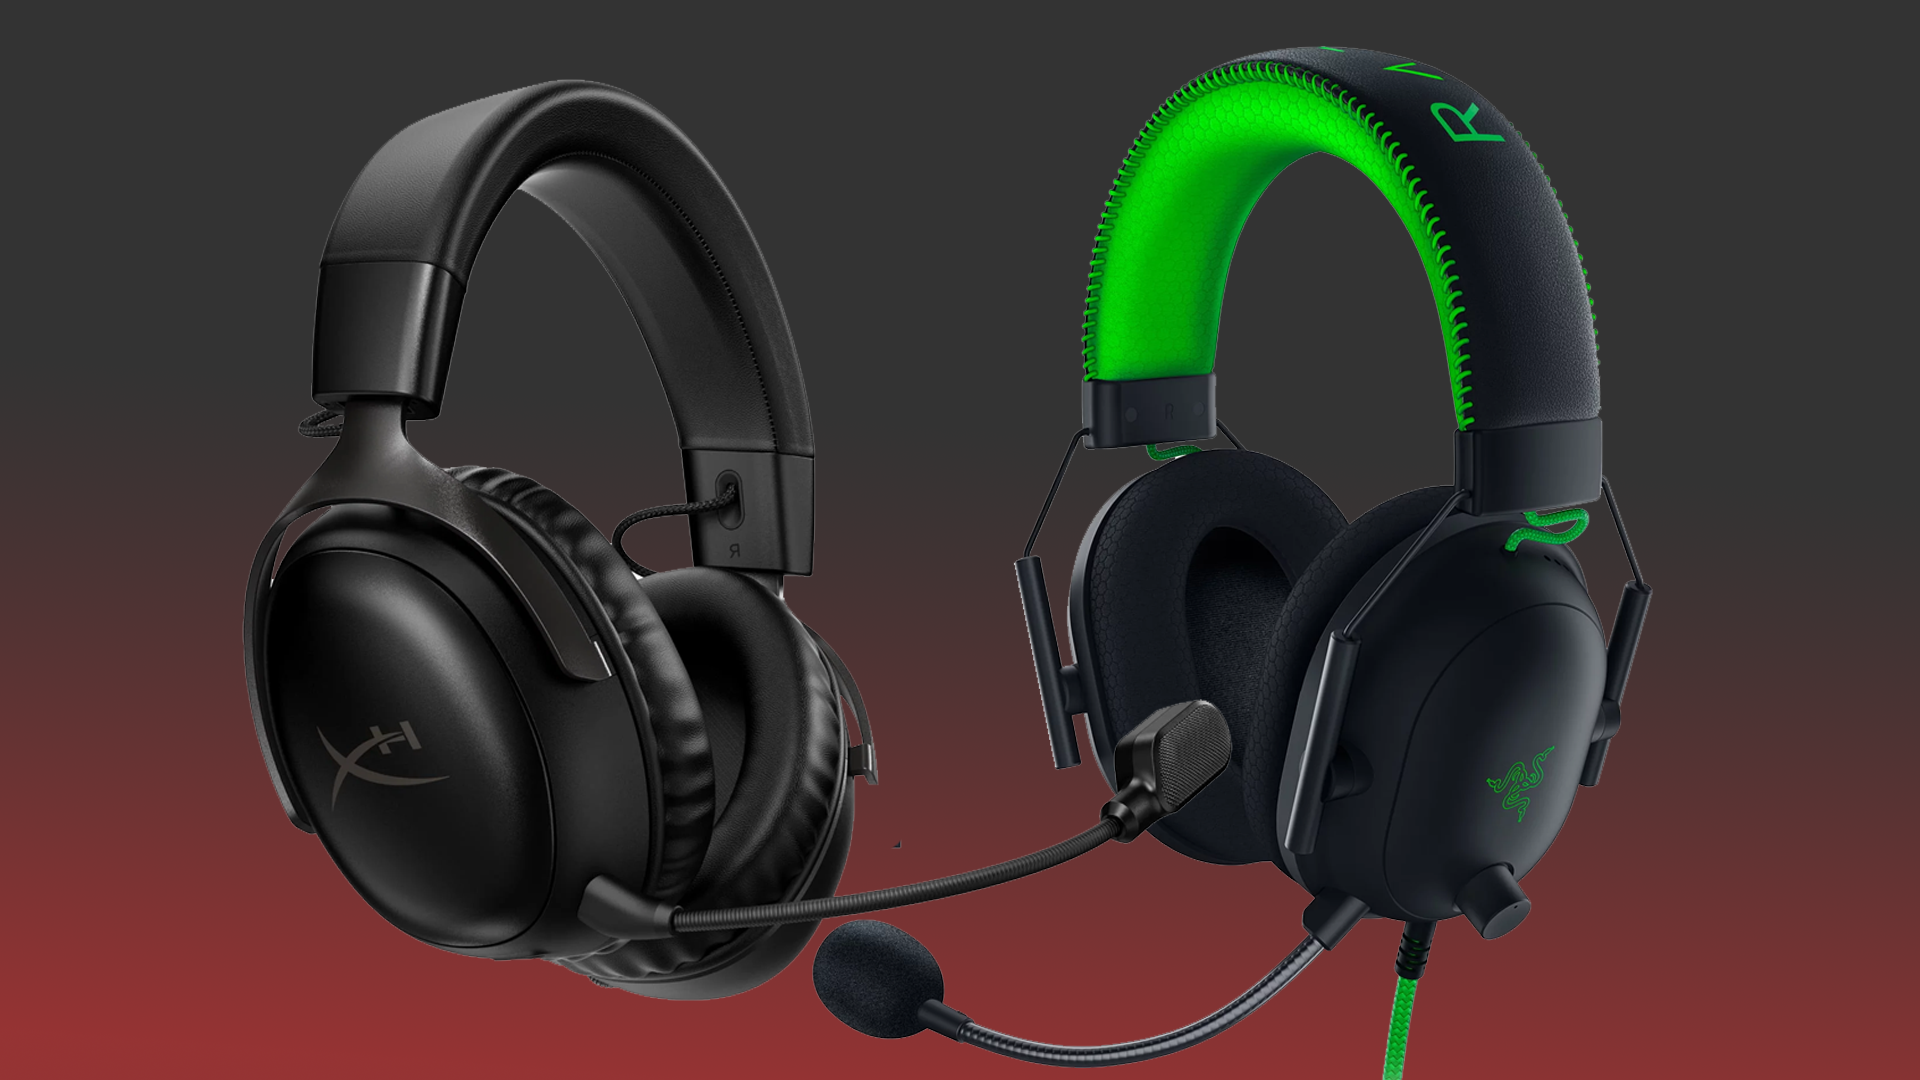 Wired vs Wireless Gaming Headsets